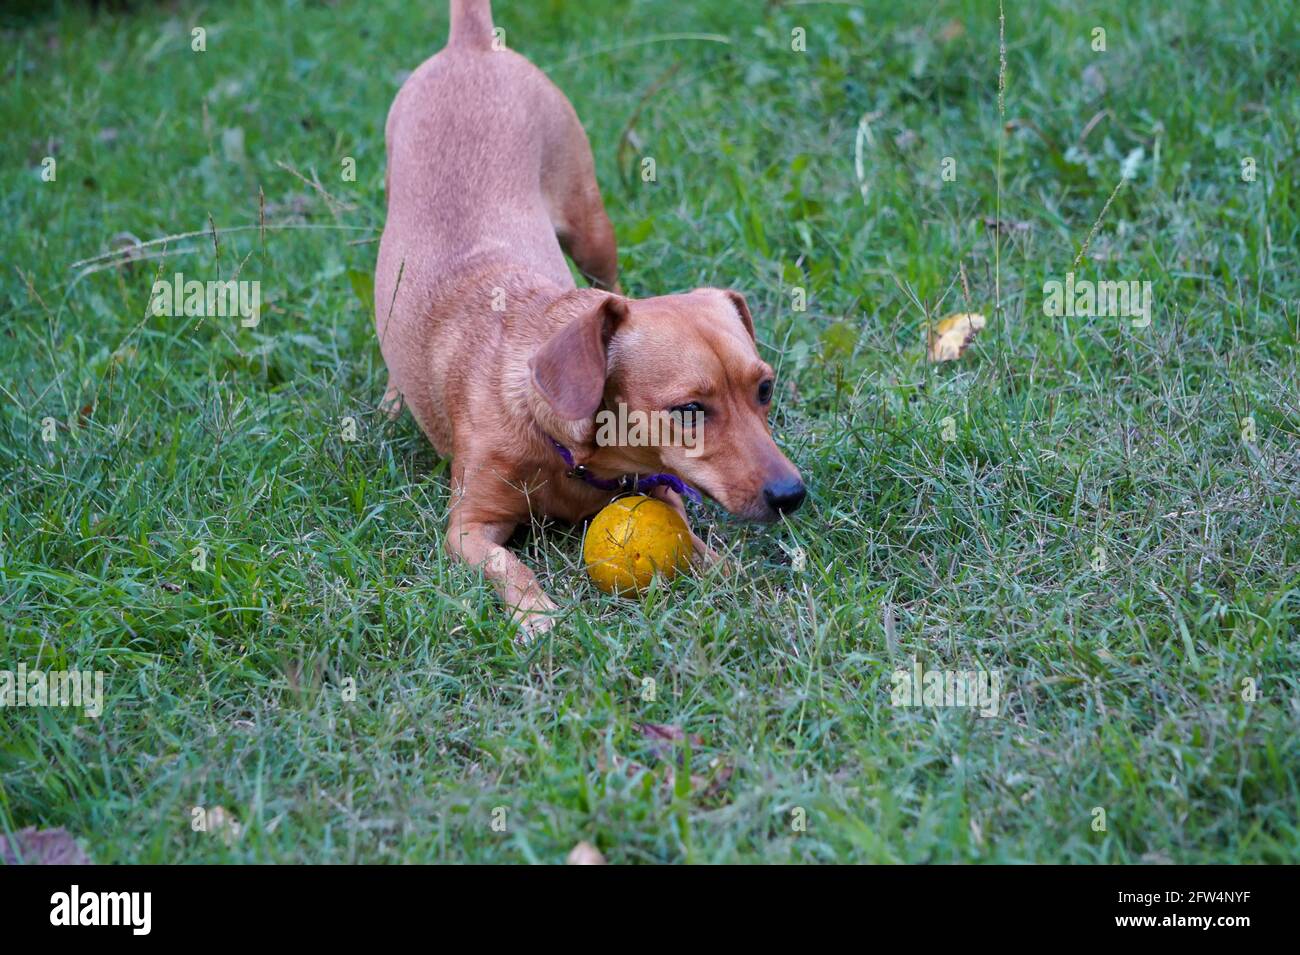 Small cute dog playing in a green grass garden with a yellow ball. Taken outdoor in a summer afternoon Stock Photo